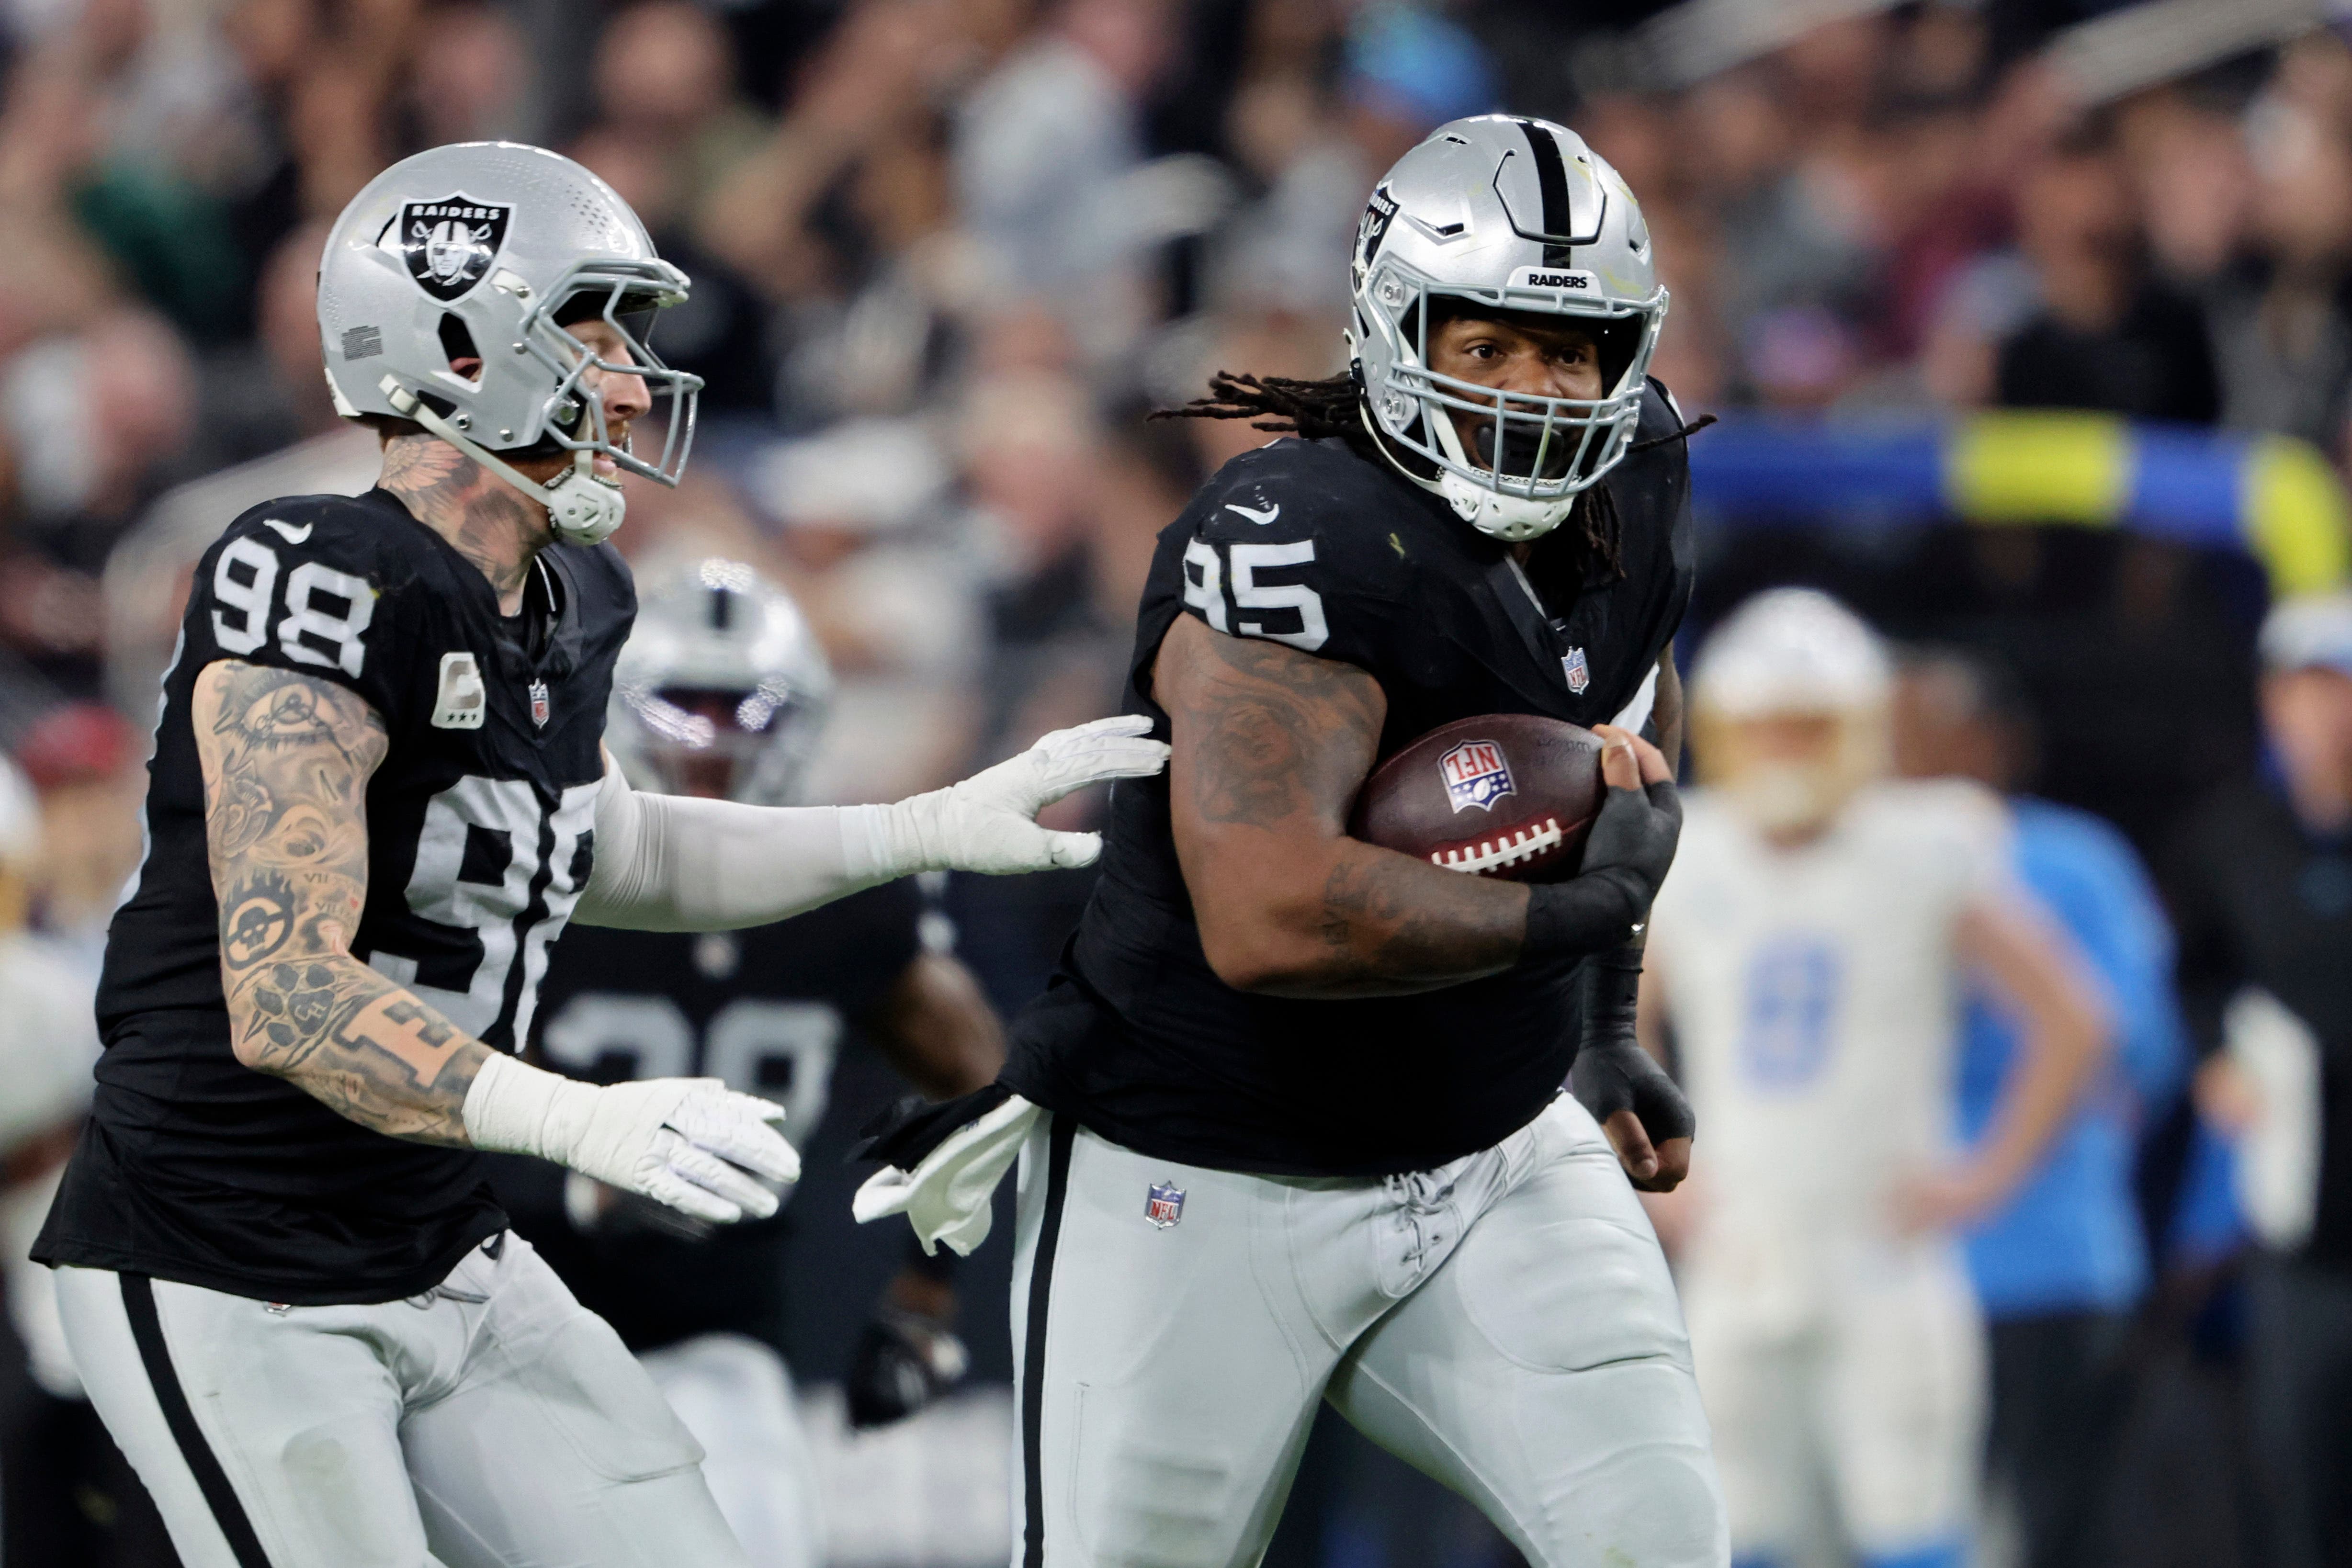 Las Vegas Raiders score nine touchdowns in 63-21 rout of Los Angeles Chargers | The Independent